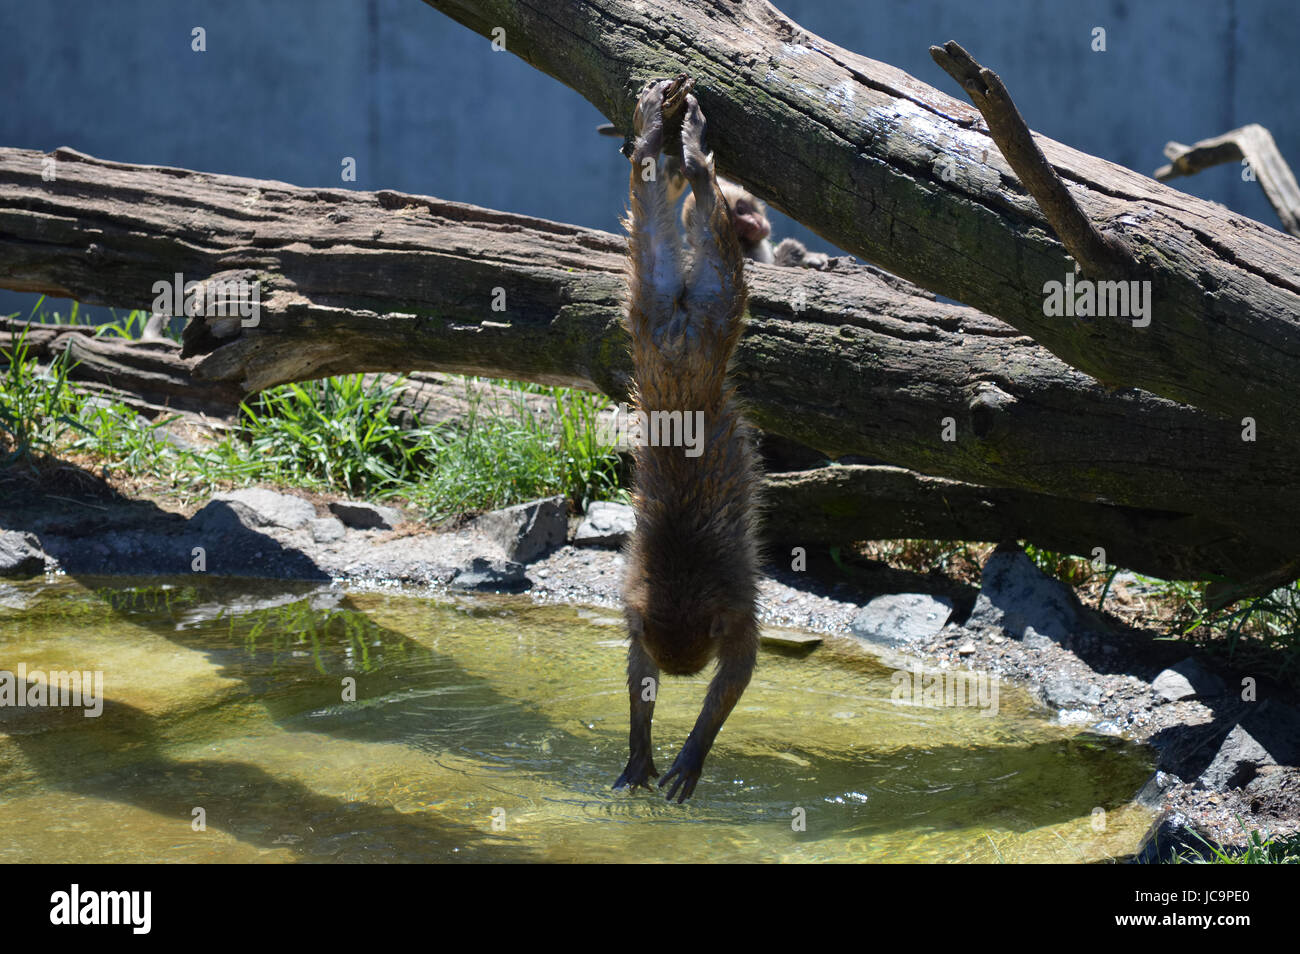 Snow monkey playing in the water Stock Photo